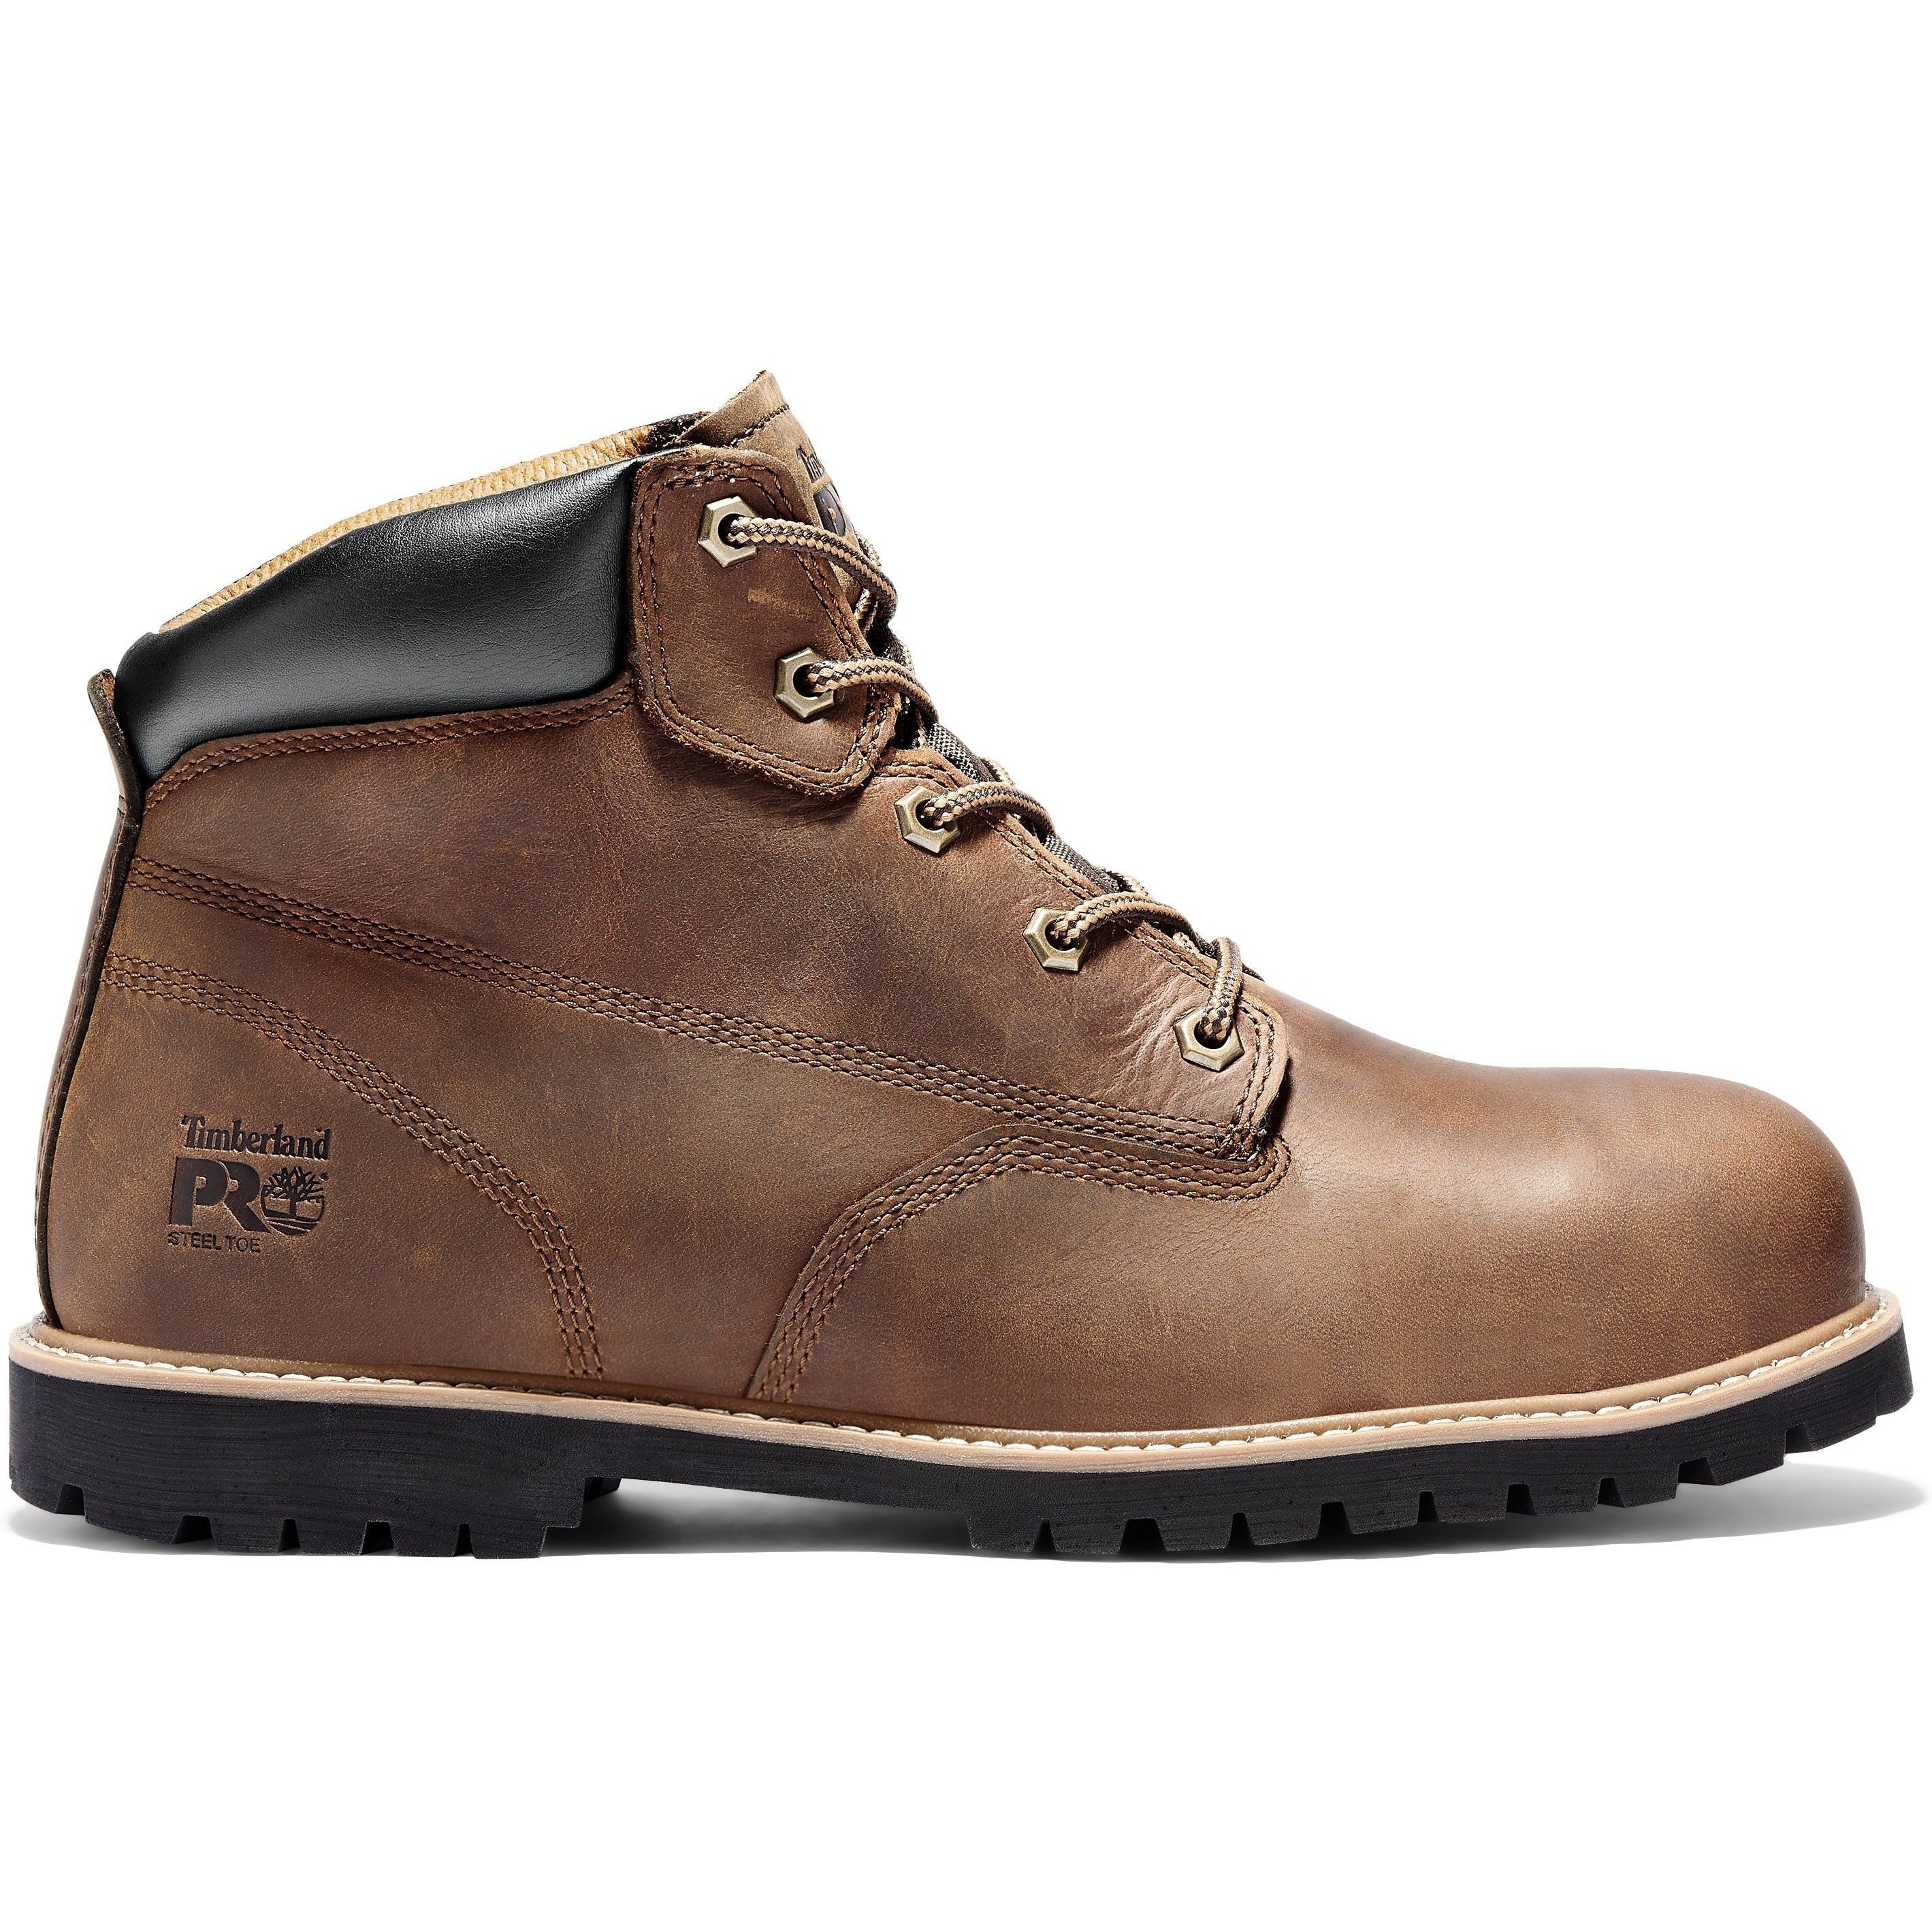 Timberland PRO Men's Gritstone 6" Steel Toe Work Boot - TB0A1Q8D214  - Overlook Boots